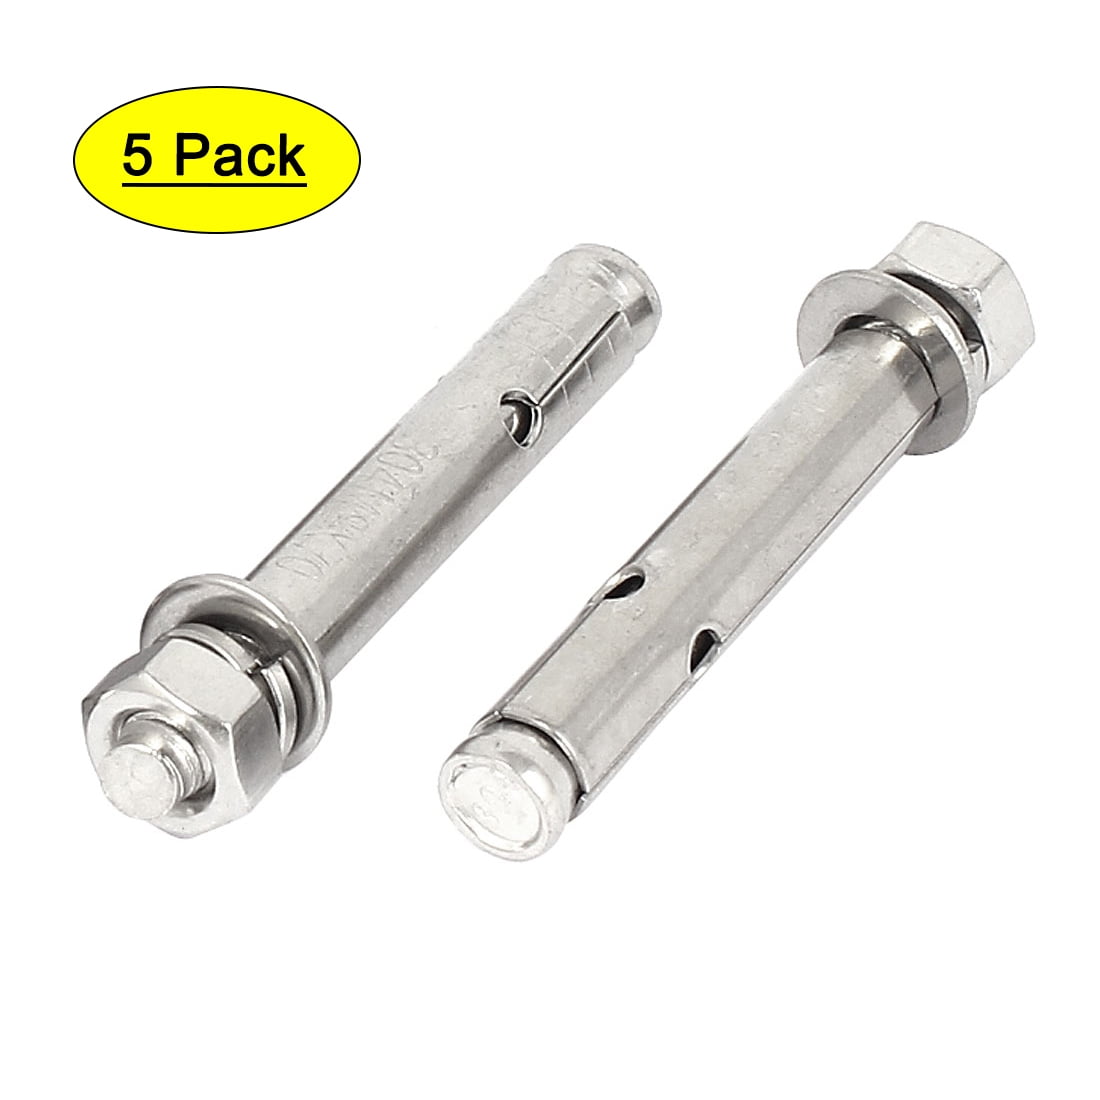 SENDILI 4 Pieces Stainless Steel Expansion Screw Bolts M10 M10*200/4 Pieces External Hex Nut Expansion Sleeve Anchor Bolt Heavy Duty Fixing Anchors